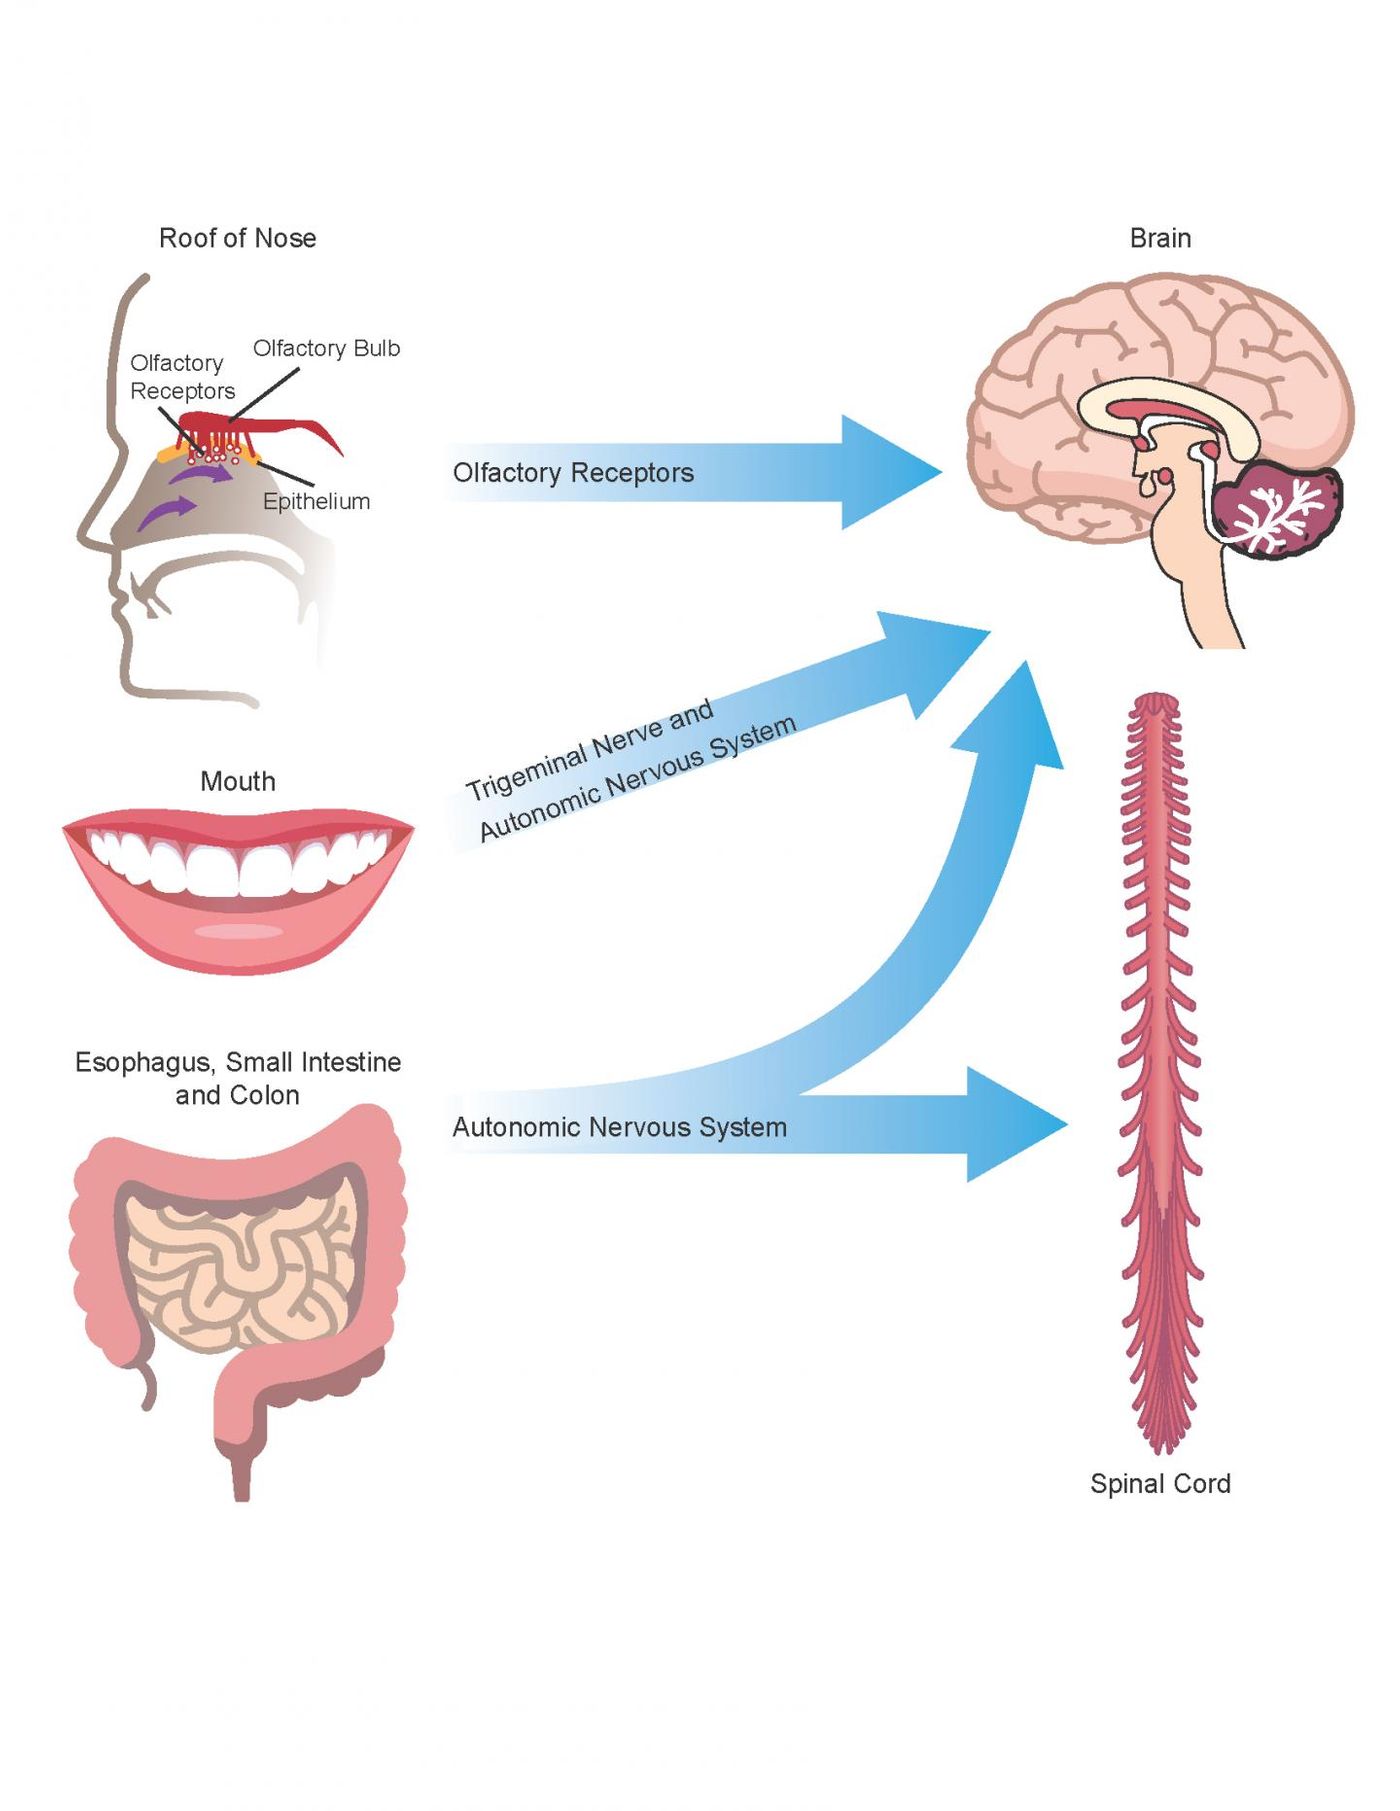 Amyloid produced by commensal bacteria may cause changes in protein folding and neuroinflammation in the central nervous system through the autonomic nervous system (particularly the vagus nerve), the trigeminal nerve in the mouth and nasopharynx, and the gut (including mouth, esophagus, stomach and intestines), as well as via the olfactory receptors in the roof of the nose. / Credit: University of Louisville